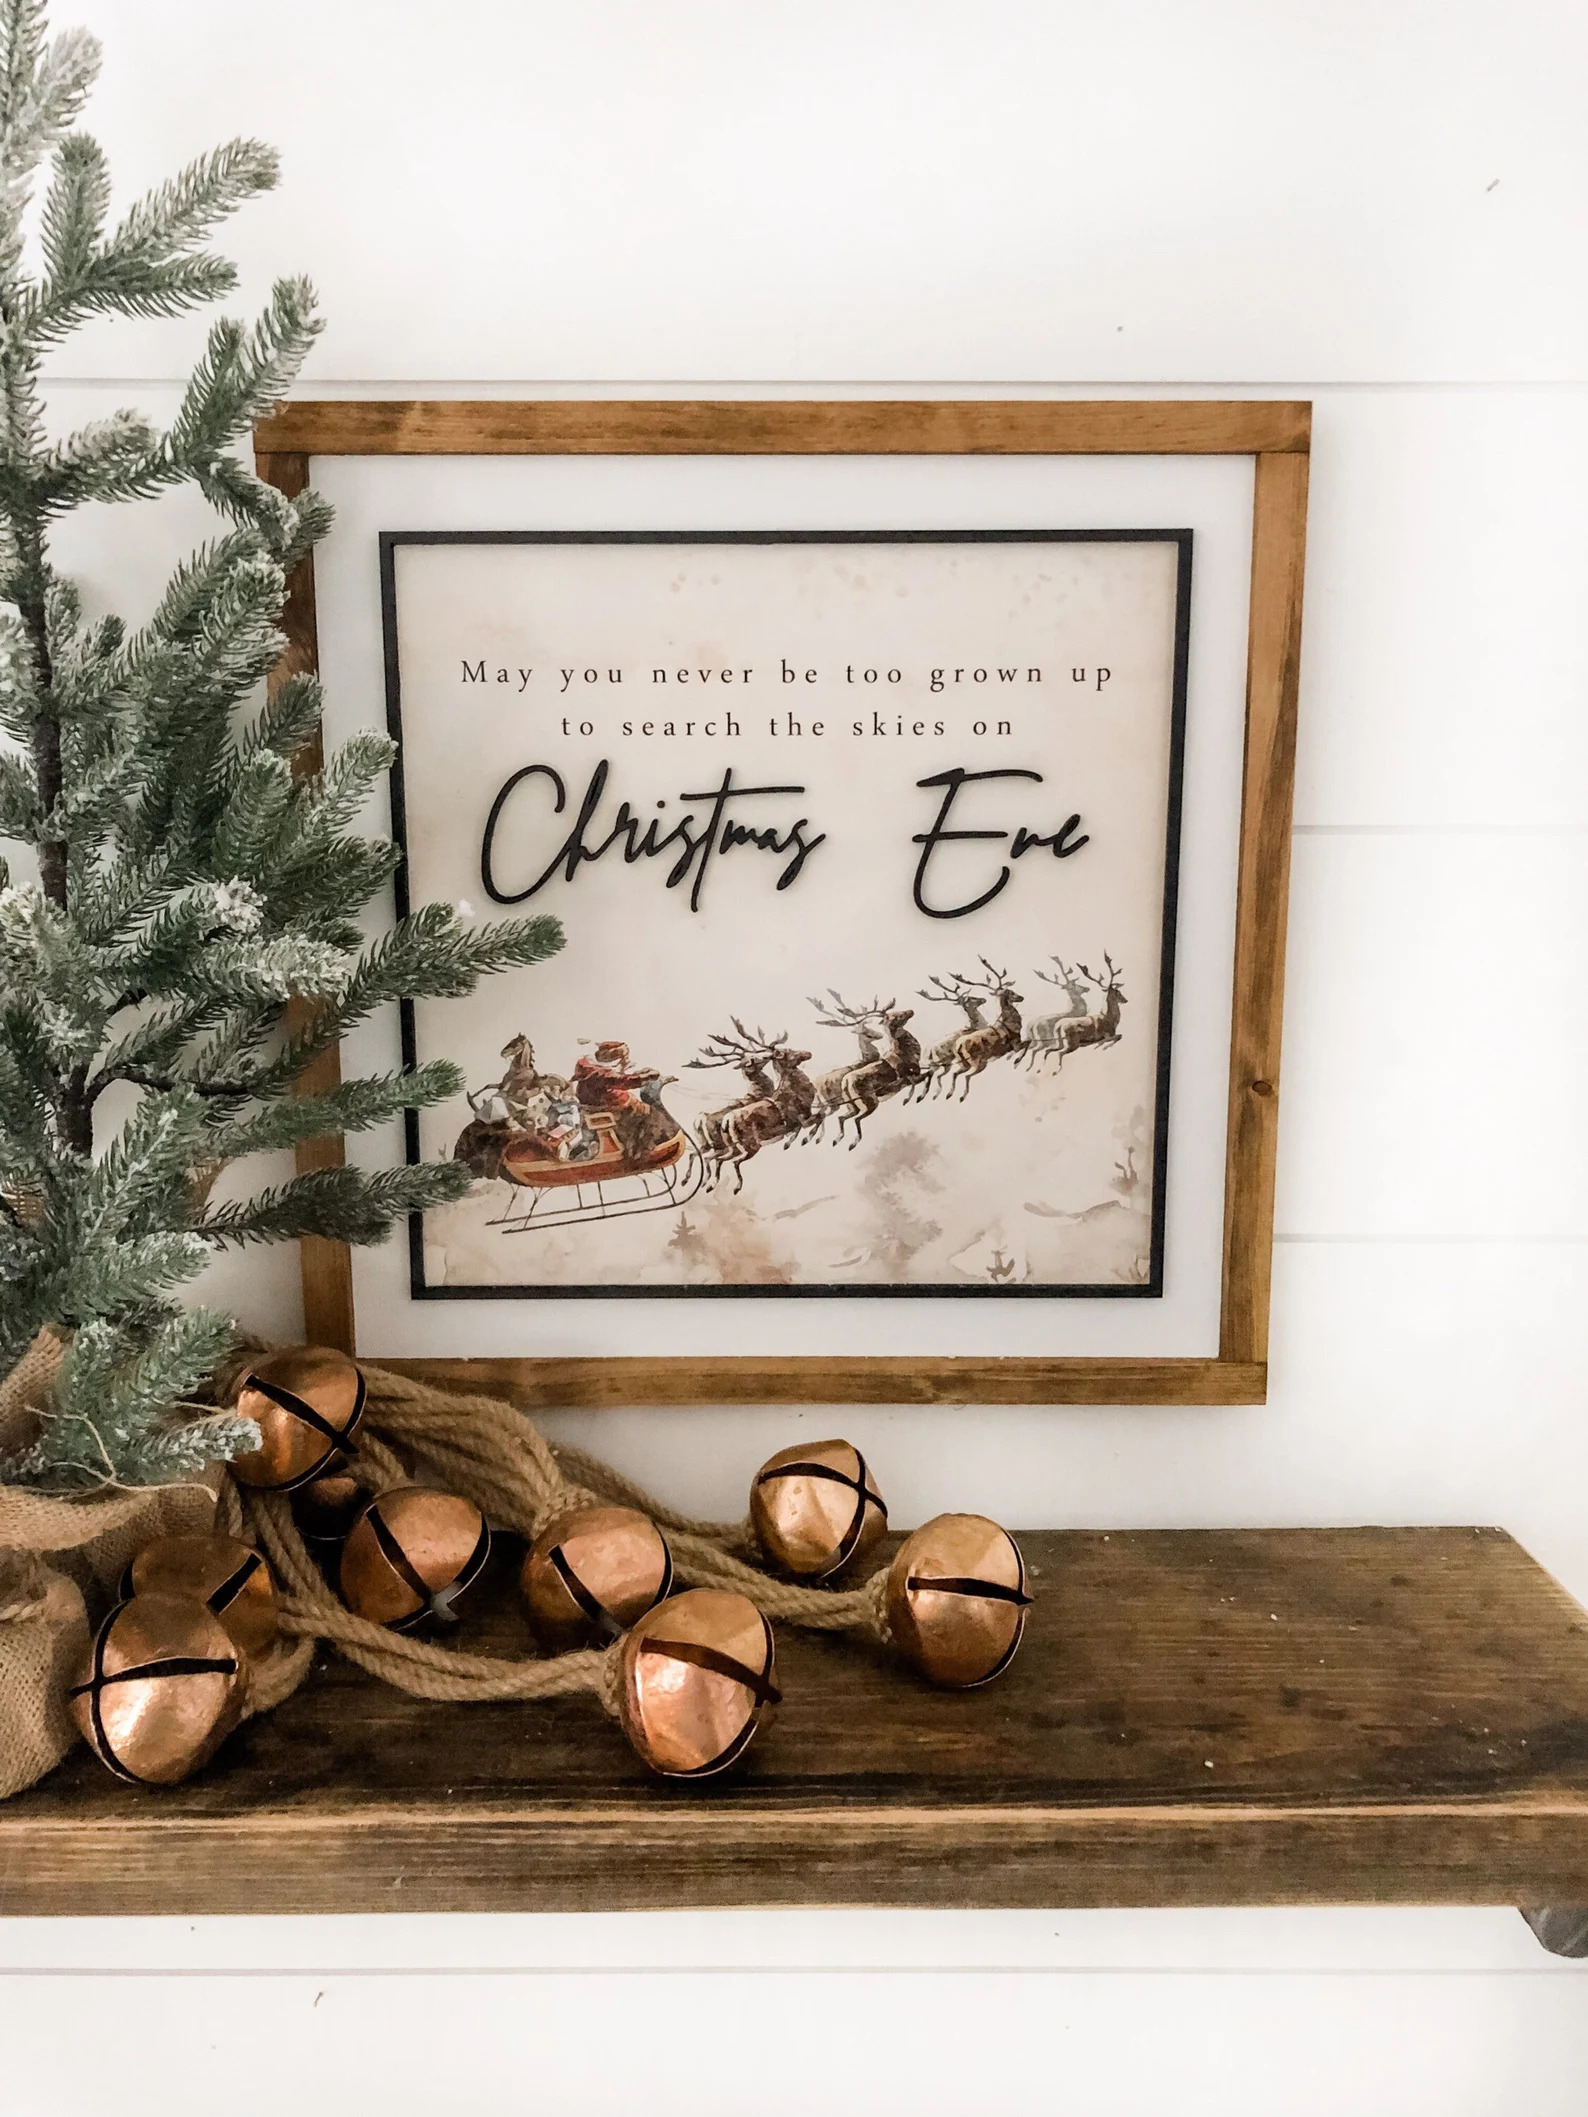 15 Charming Christmas Signs You Can Start Sneaking In Your Home Décor